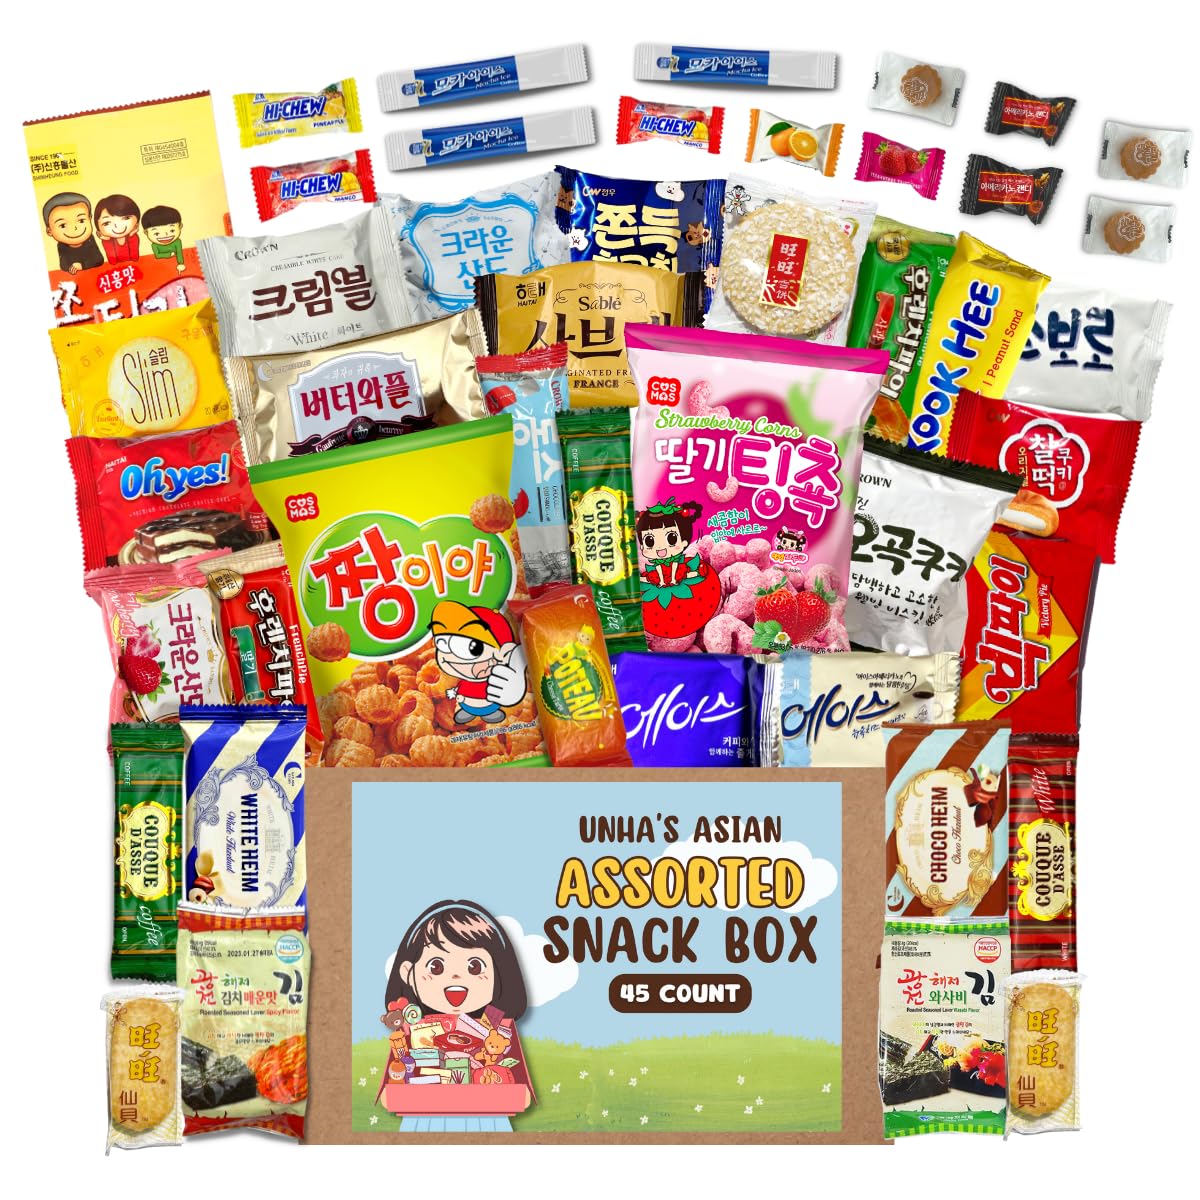 Korean Snack Box Variety Pack - 46 Count Snacks Individual Wrapped Gift  Care Package Bundle Sampler Tiktok Asian Challenge Assortment Mix Candy  Chips